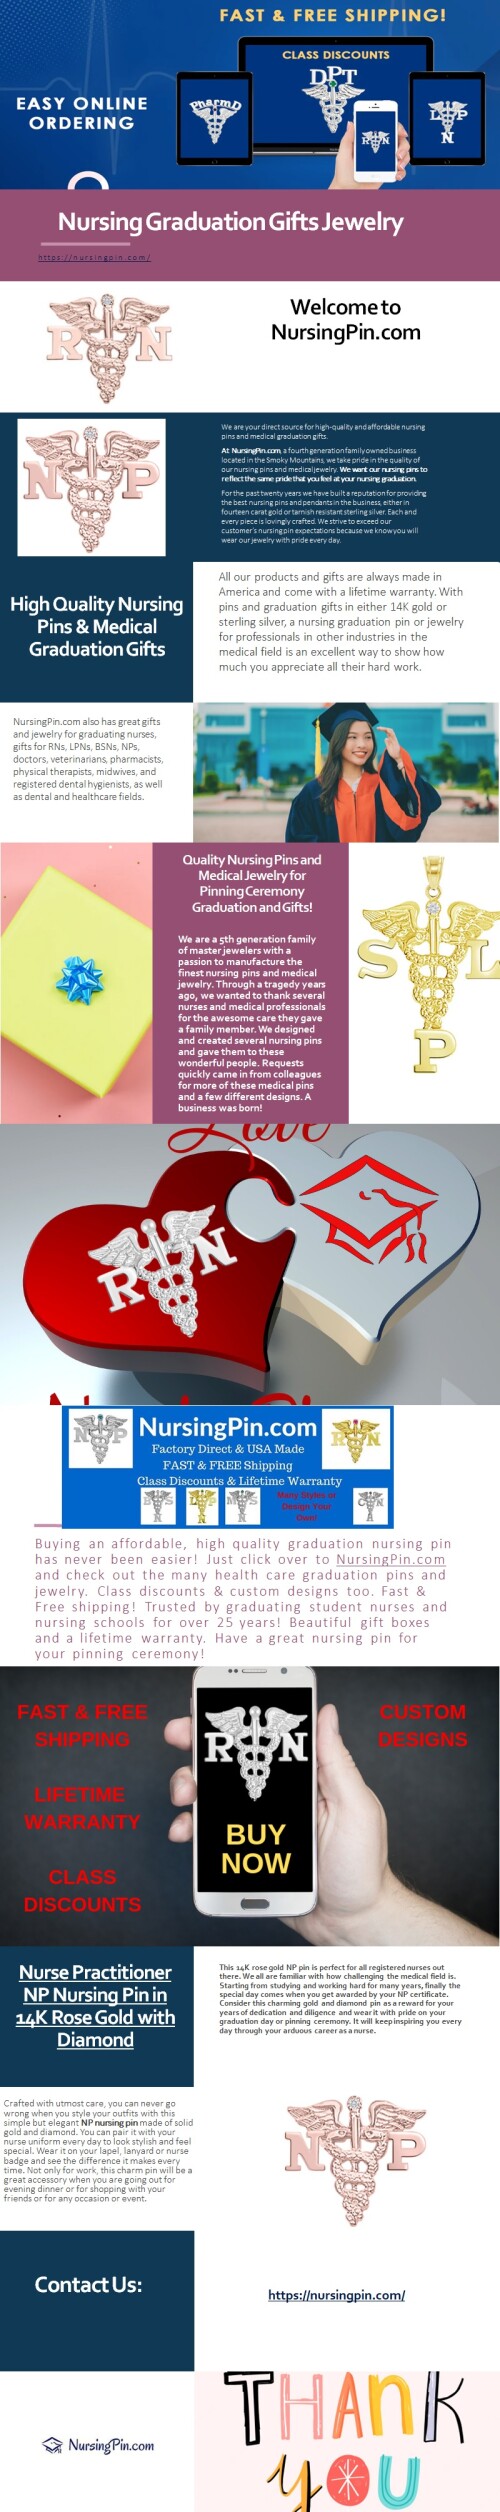 Looking for the perfect gift for a nursing graduate? Look no further than Nursing Pin. Our selection of beautiful and unique nursing graduation gifts jewelry. We have something to suit every taste and budget. Our gifts are made from the highest quality materials and finished to the very highest standards, so you can be sure your loved one will love them!
https://nursingpin.com/products/14k-rose-gold-respiratory-rt-necklace-diamond